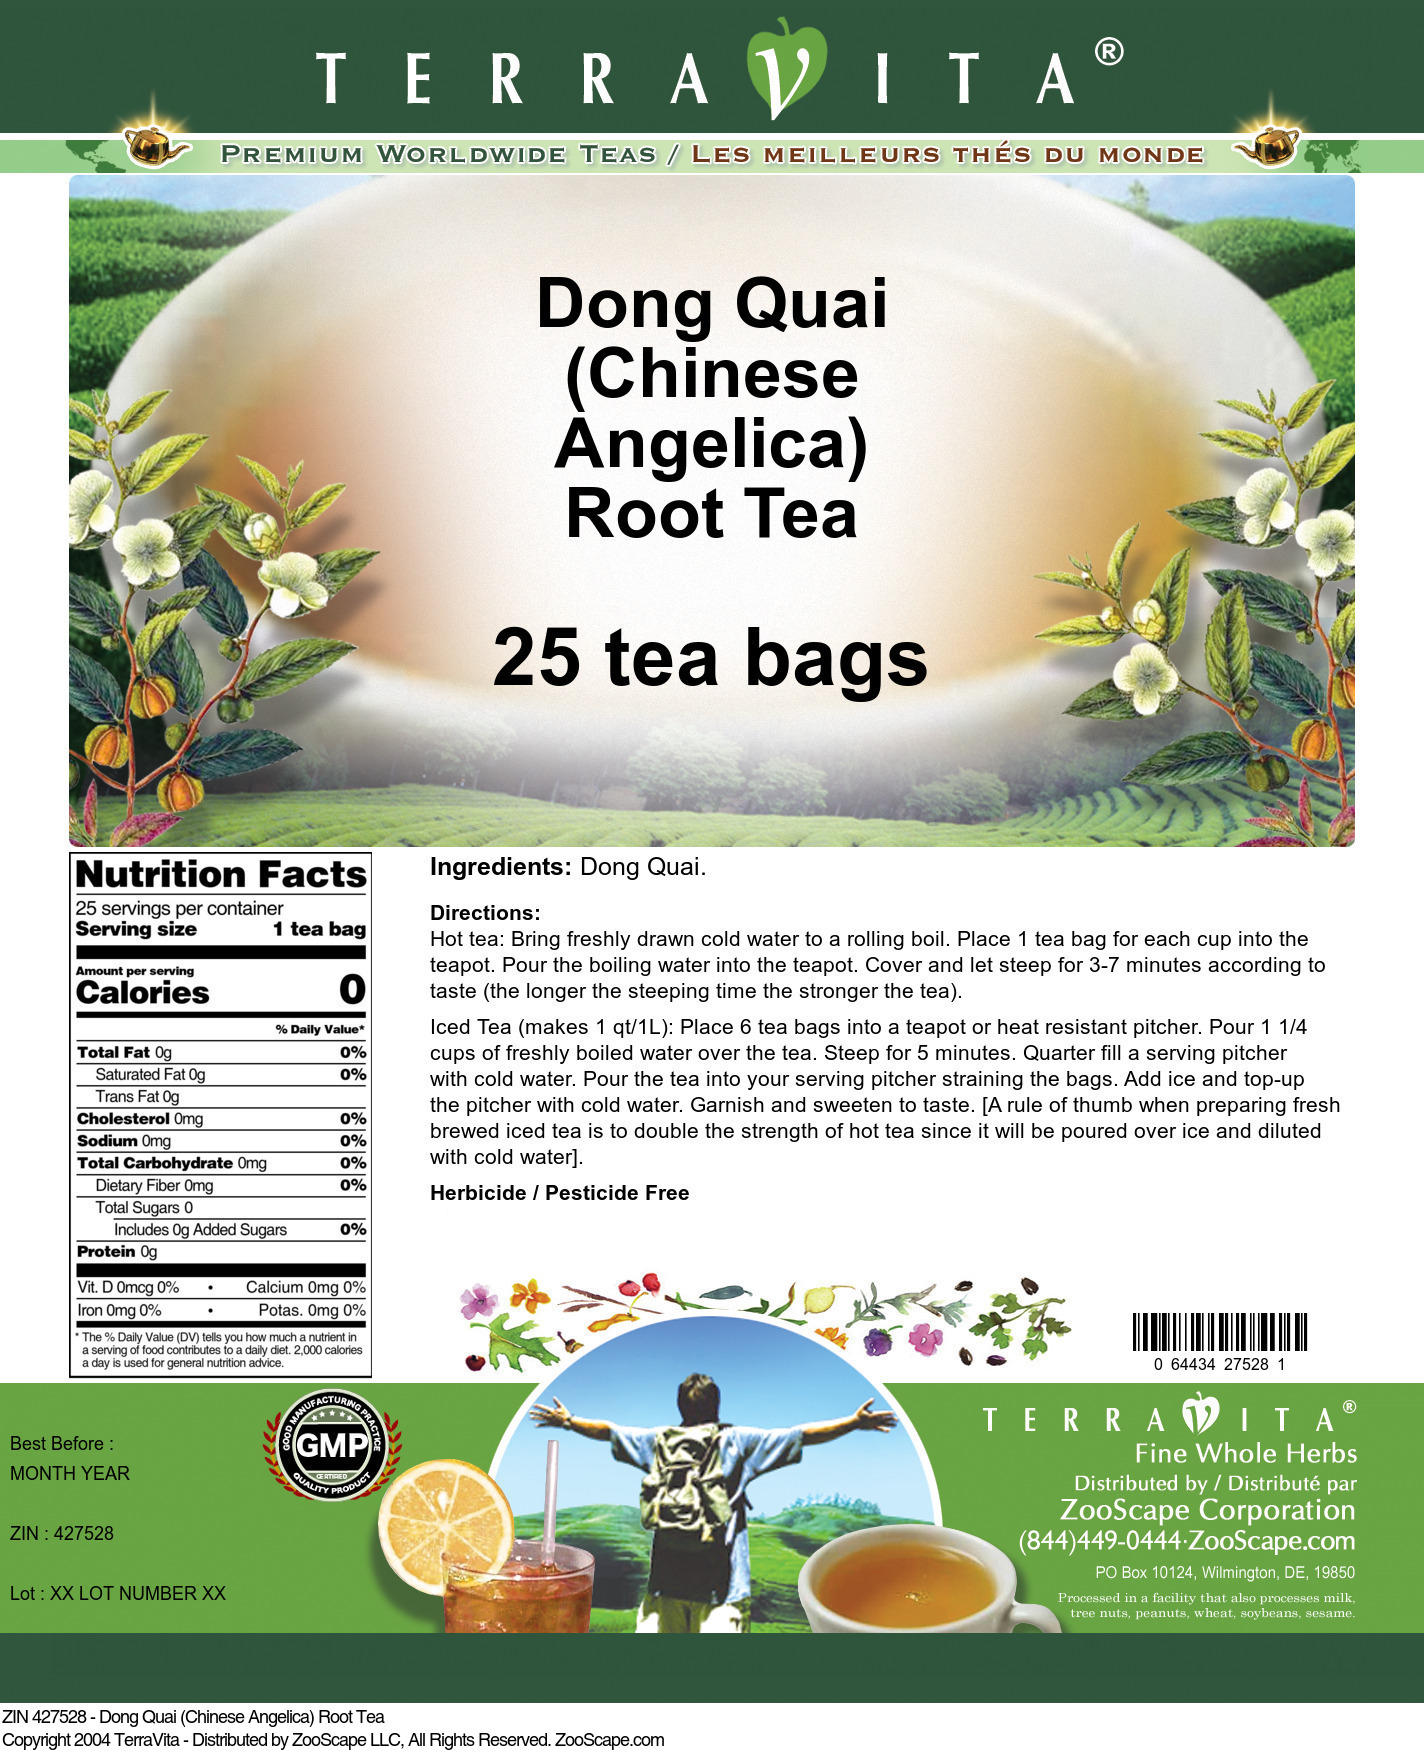 Dong Quai (Chinese Angelica) Root Tea - Label